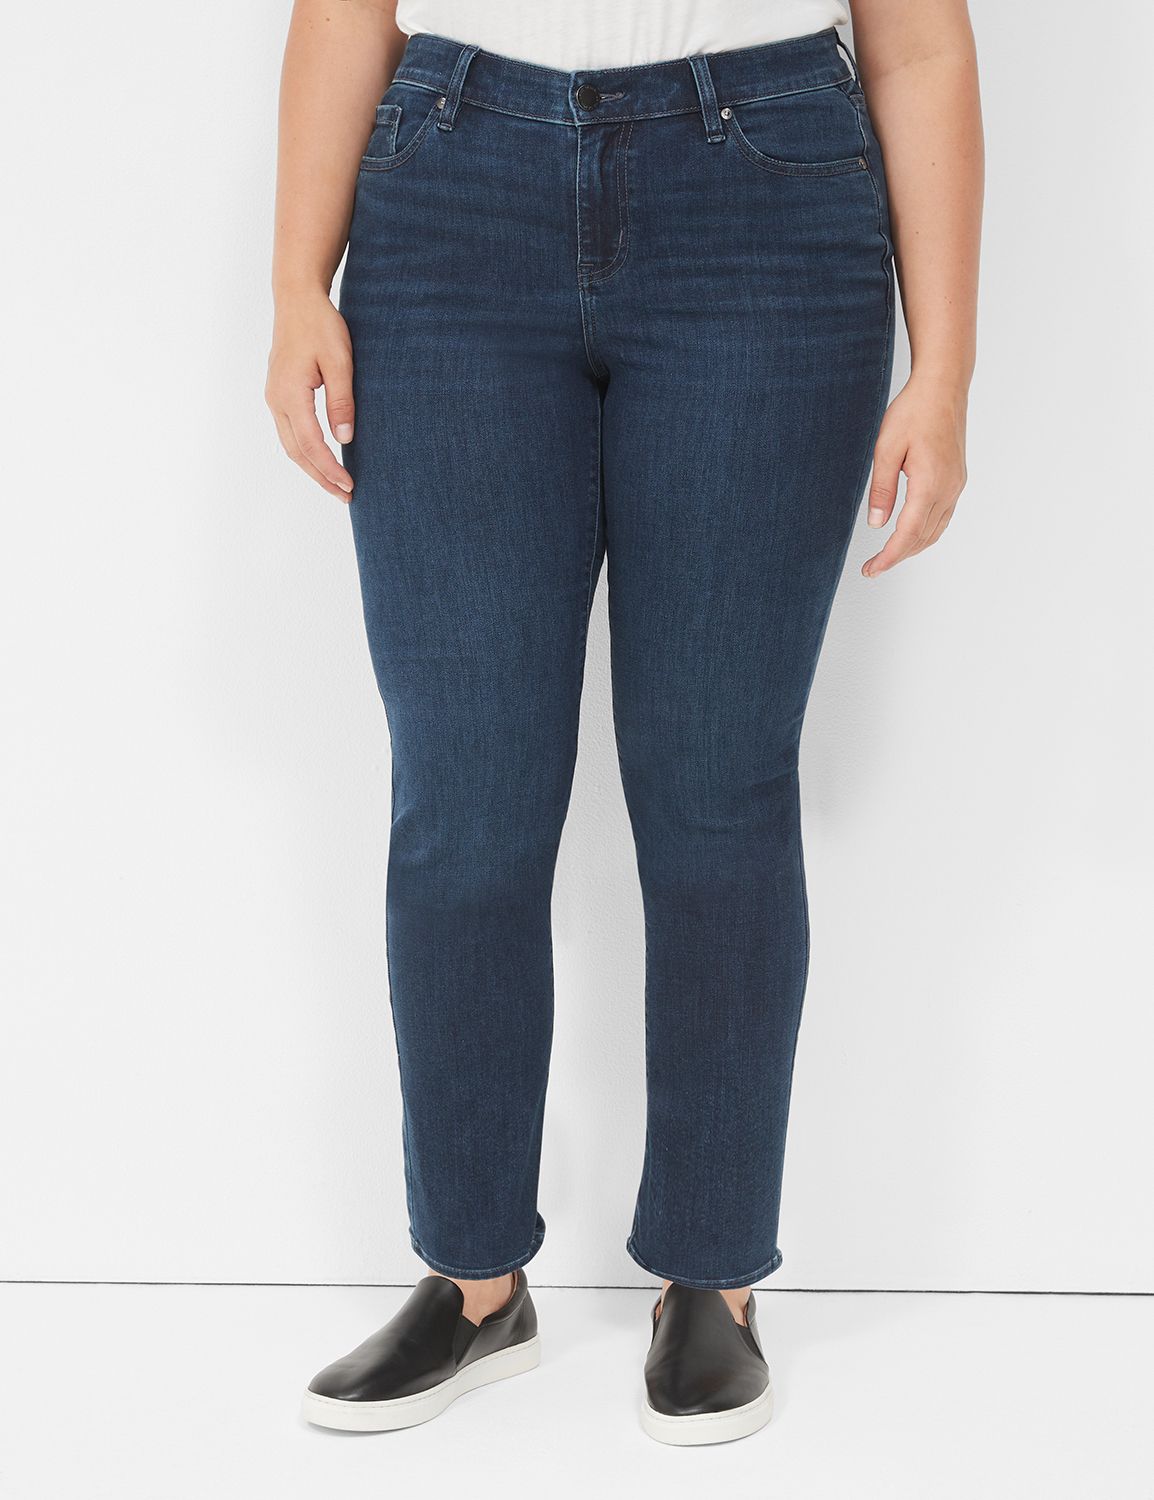 Plus Size Women's Size 12-PETITE Jeans: Skinny, Flare & More